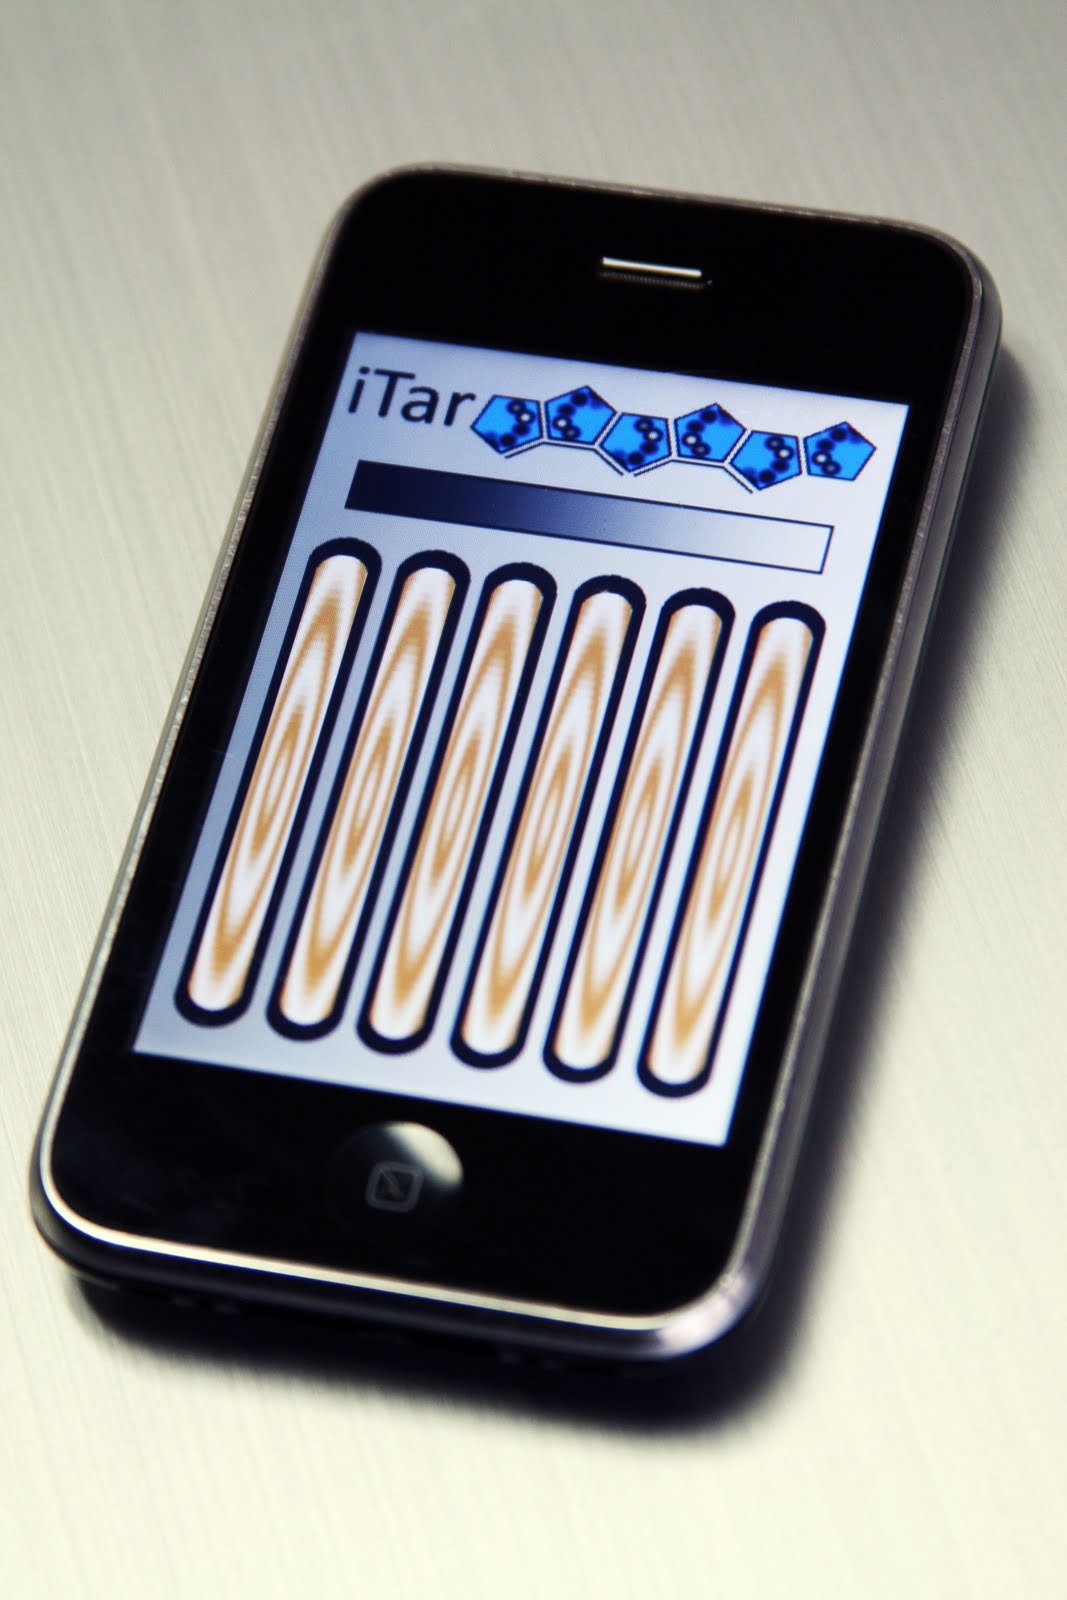 MATRIXSYNTH: Fruity Loops Coming to iPhone, iPod Touch and iPad